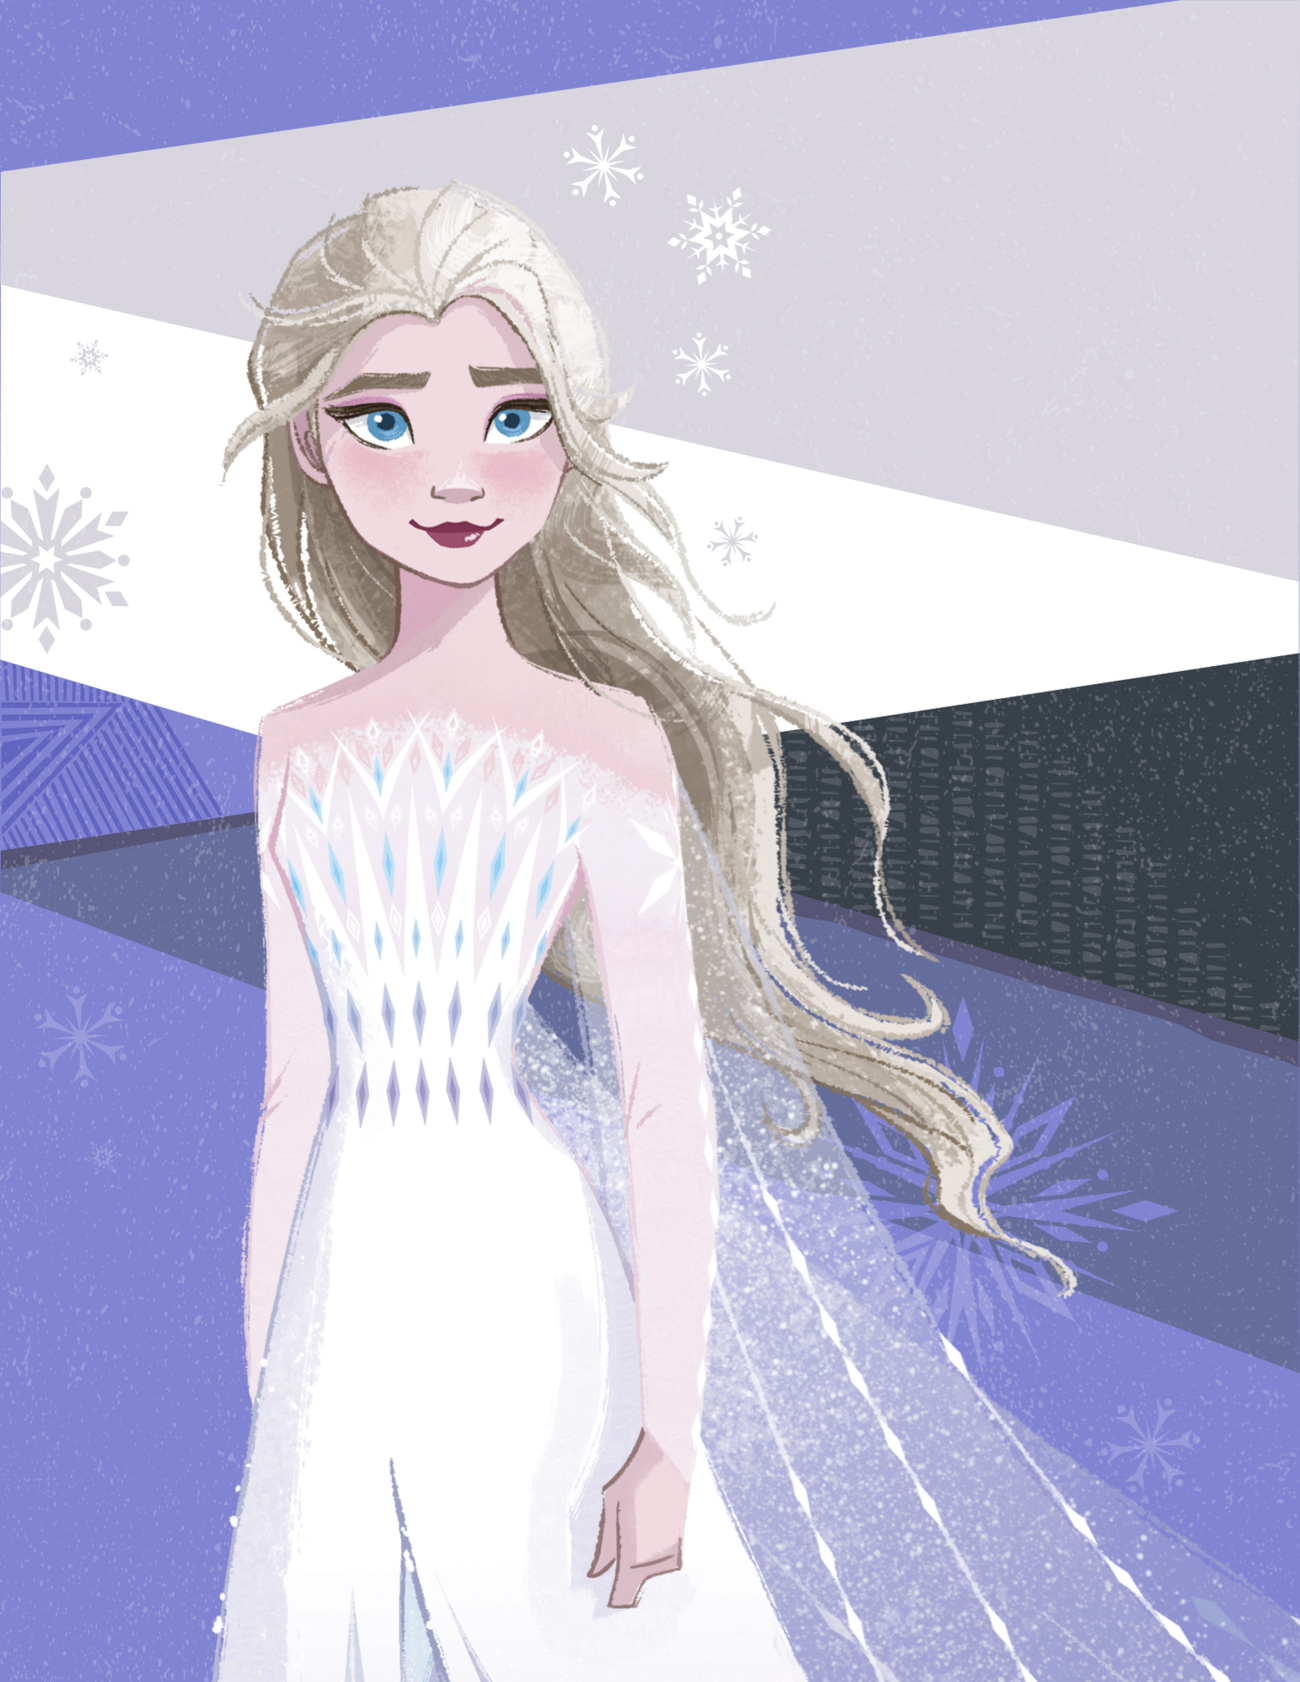 frozen-2-elsa-in-white-dress-with-hair-down-new-official-big-images